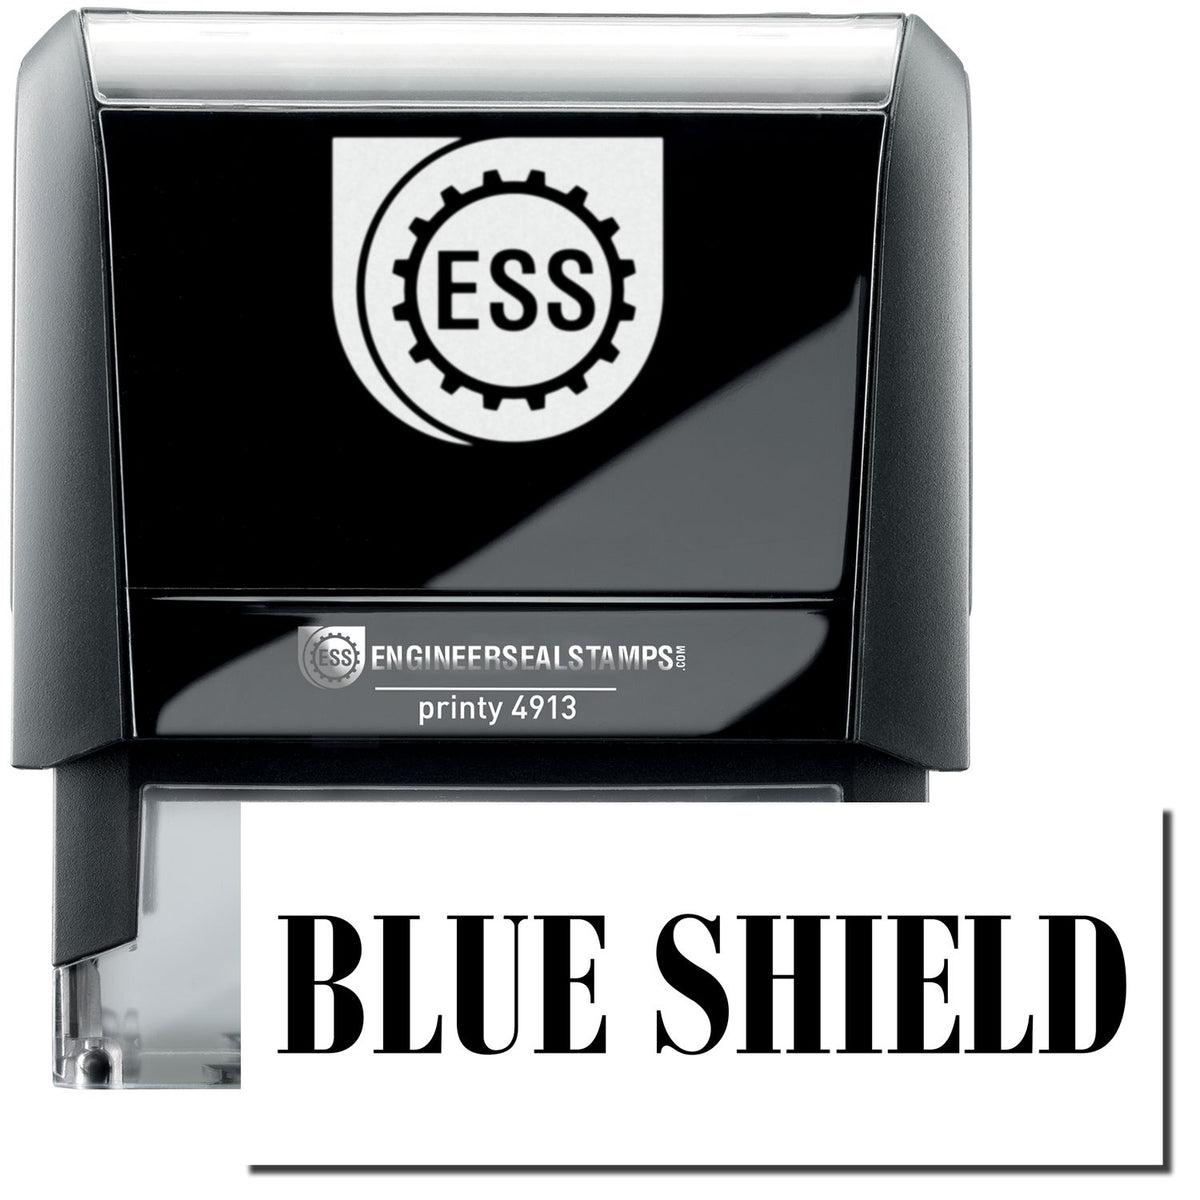 A self-inking stamp with a stamped image showing how the text &quot;BLUE SHIELD&quot; in a large bold font is displayed by it.